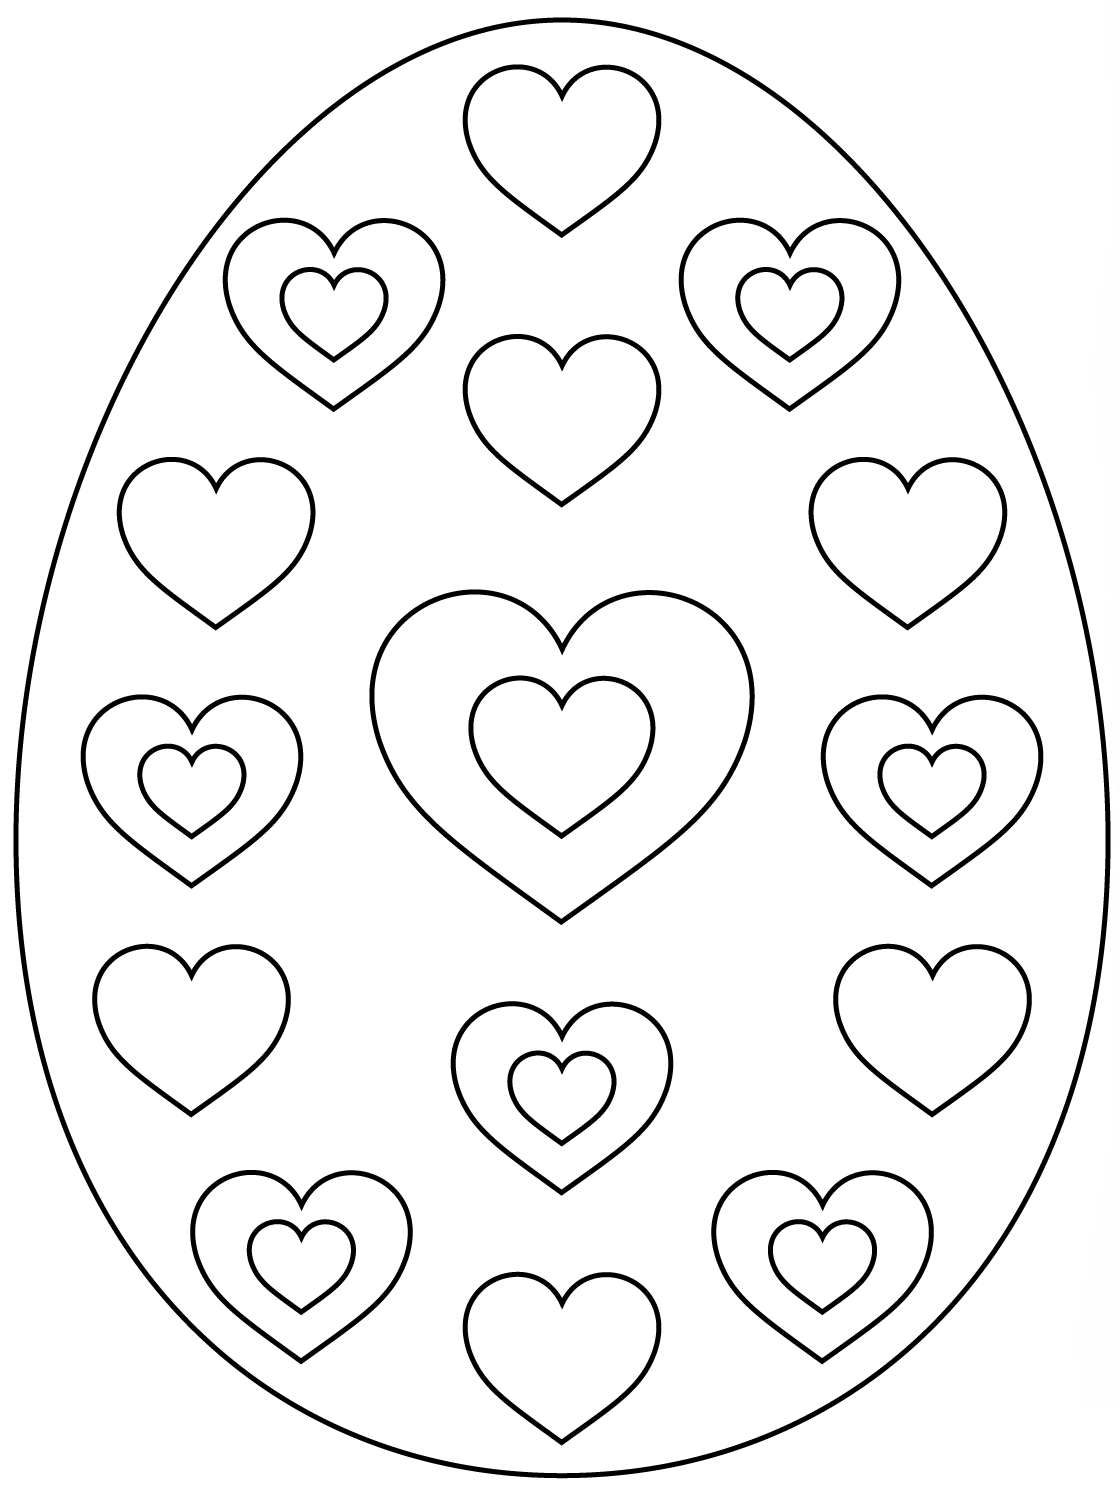 Easter Egg With Hearts